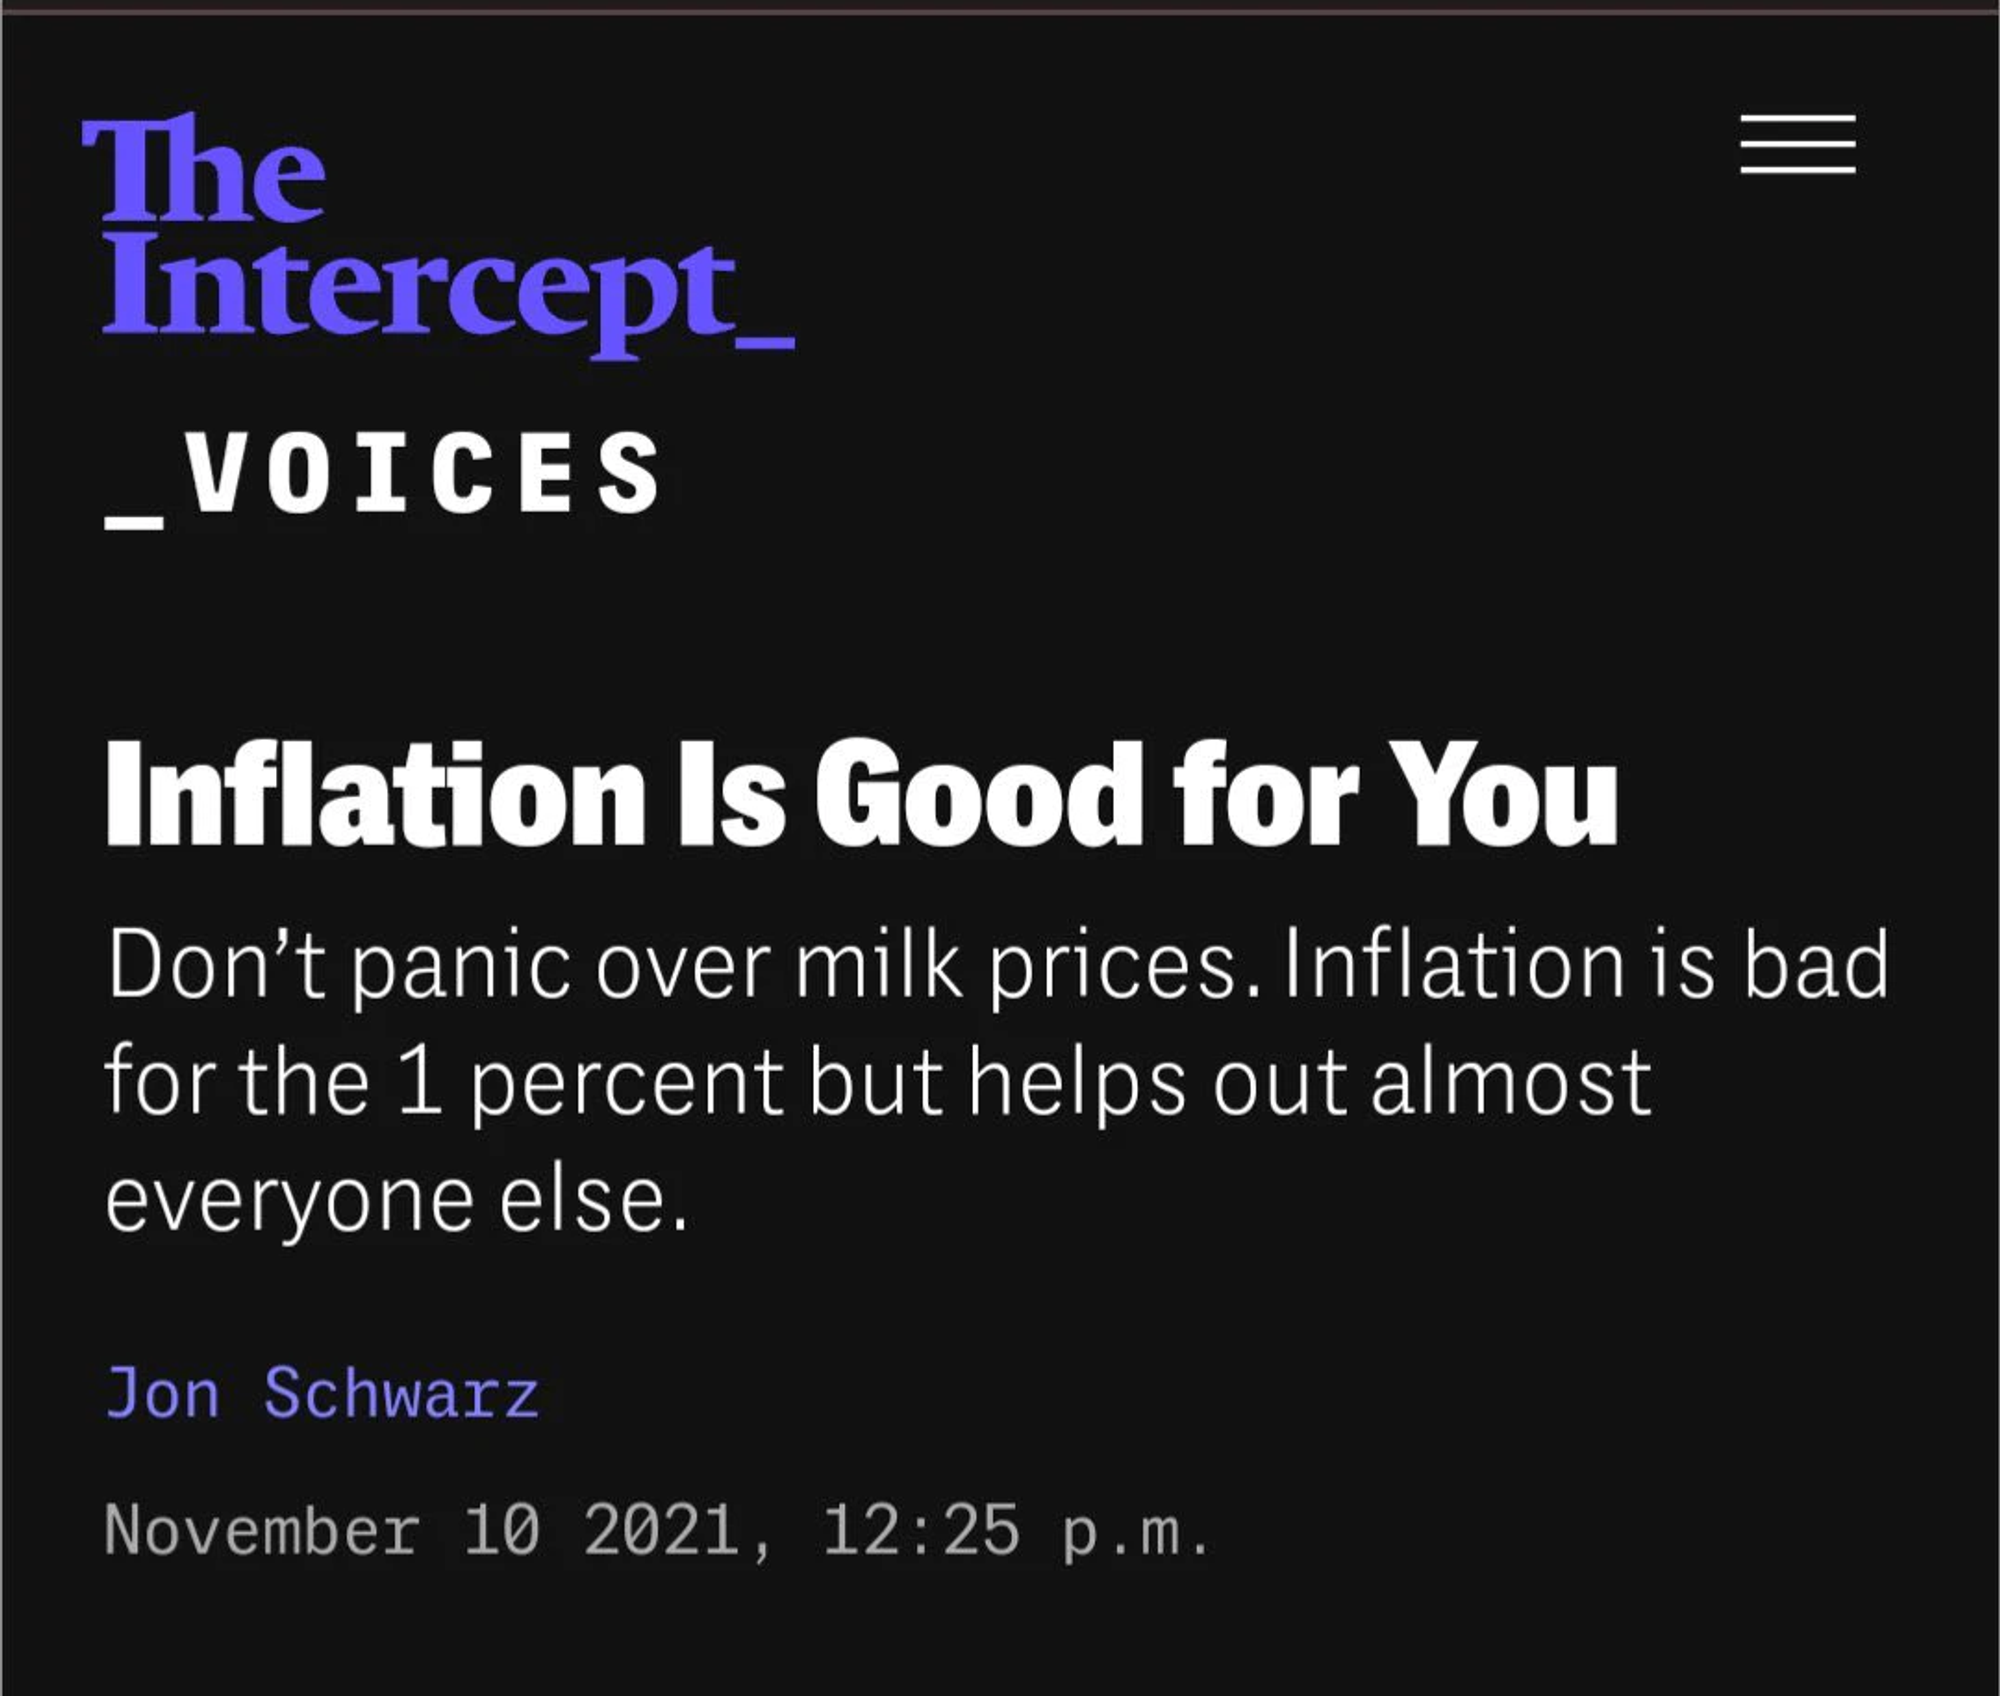 Inflation is Good For You?